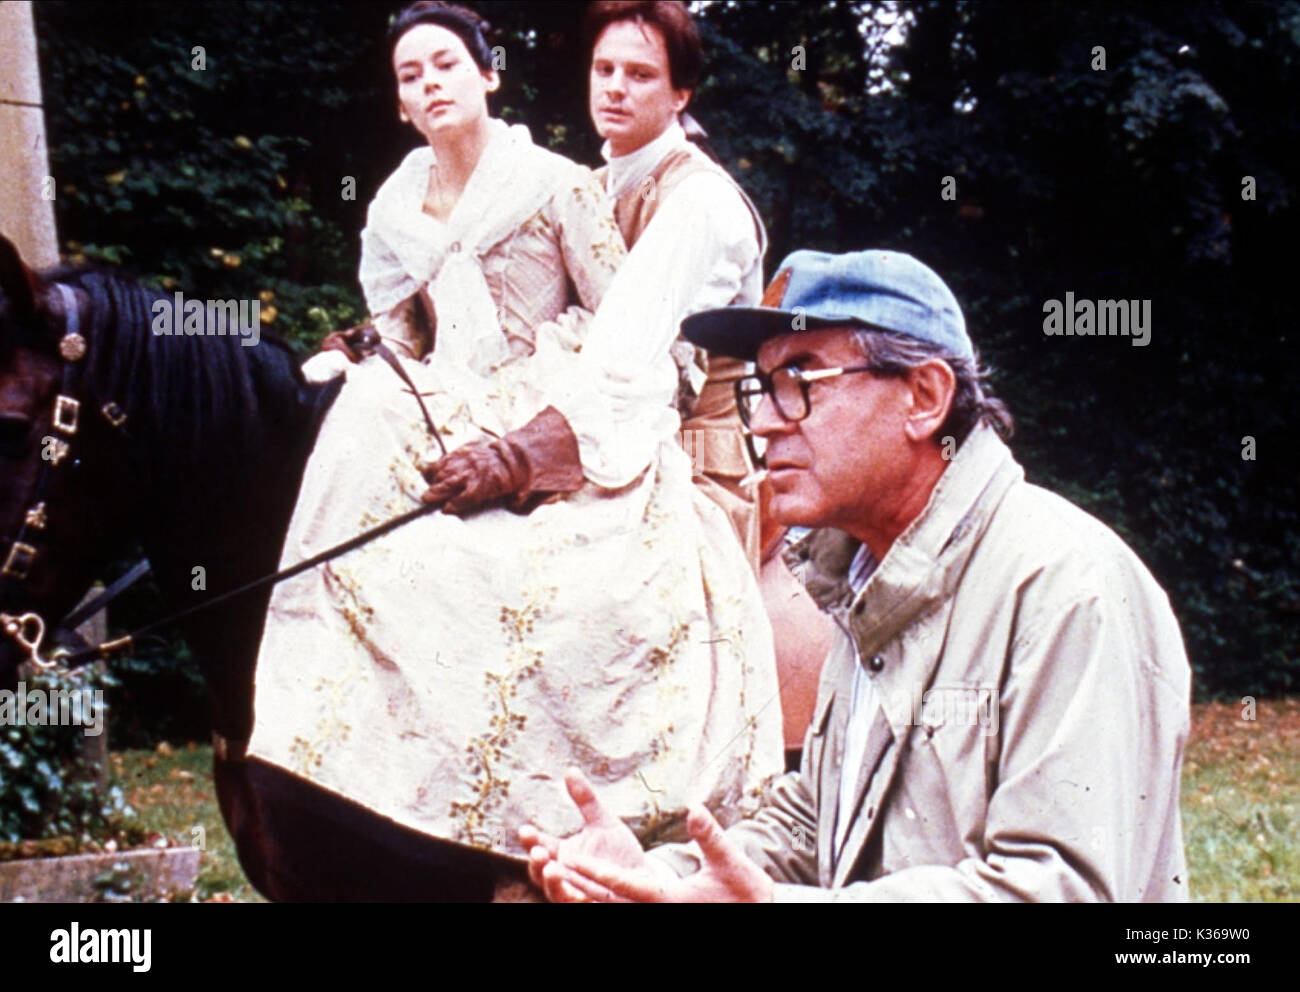 VALMONT director, MILOS FORMAN, MEG TILLY, COLIN FIRTH     Date: 1985 Stock Photo